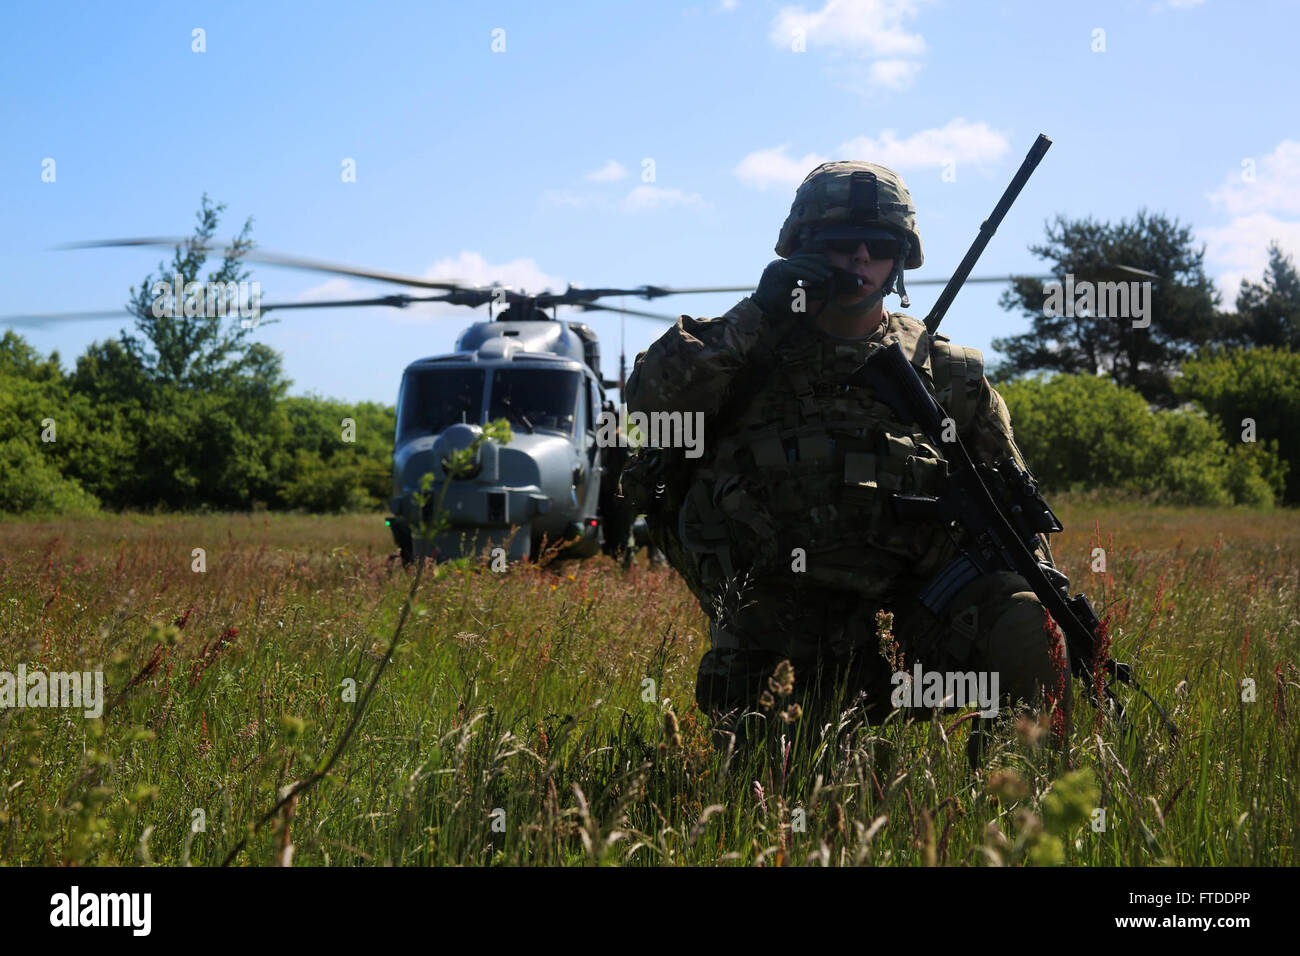 150615-M-OM669-005 POLAND (June 15, 2015) U.S. Army paratroopers from the 173d Airborne Brigade inserted into Poland via a British Royal Navy Lynx Mk-8 and conducted a personnel extraction, June 15. The mission is one of the exercise scenarios for BALTOPS 2015, an annually reoccurring multinational exercise designed to enhance flexibility and interoperability, as well as demonstrate resolve of allied and partner forces to defend the Baltic region. (Official U.S. Marine Corps photo by 1st Lt. Sarah E. Burns/Released) Stock Photo